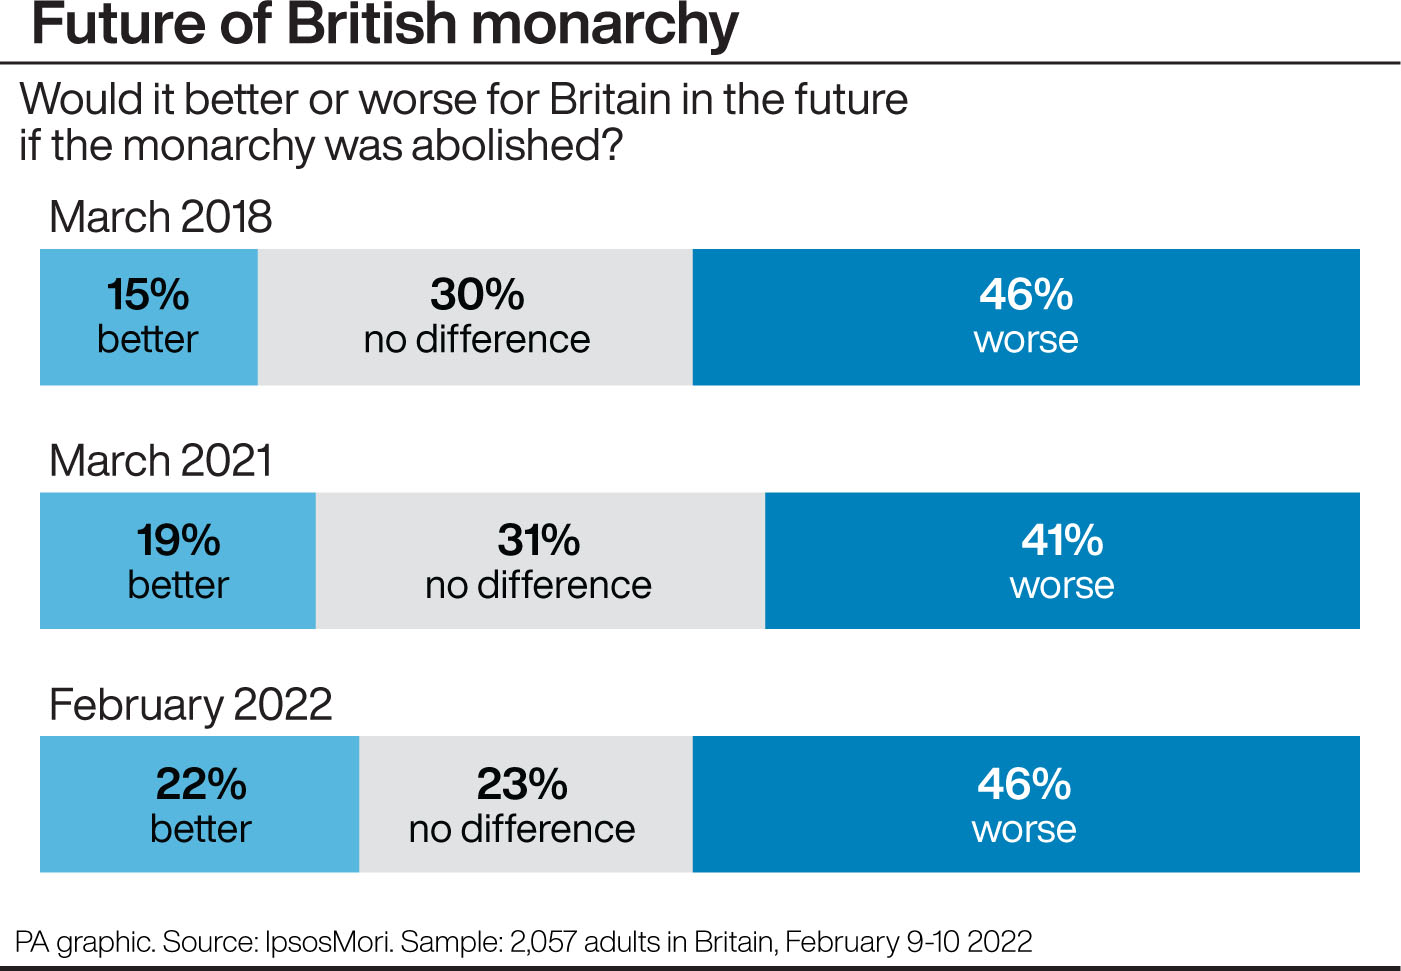 PA infographic showing future of British monarchy